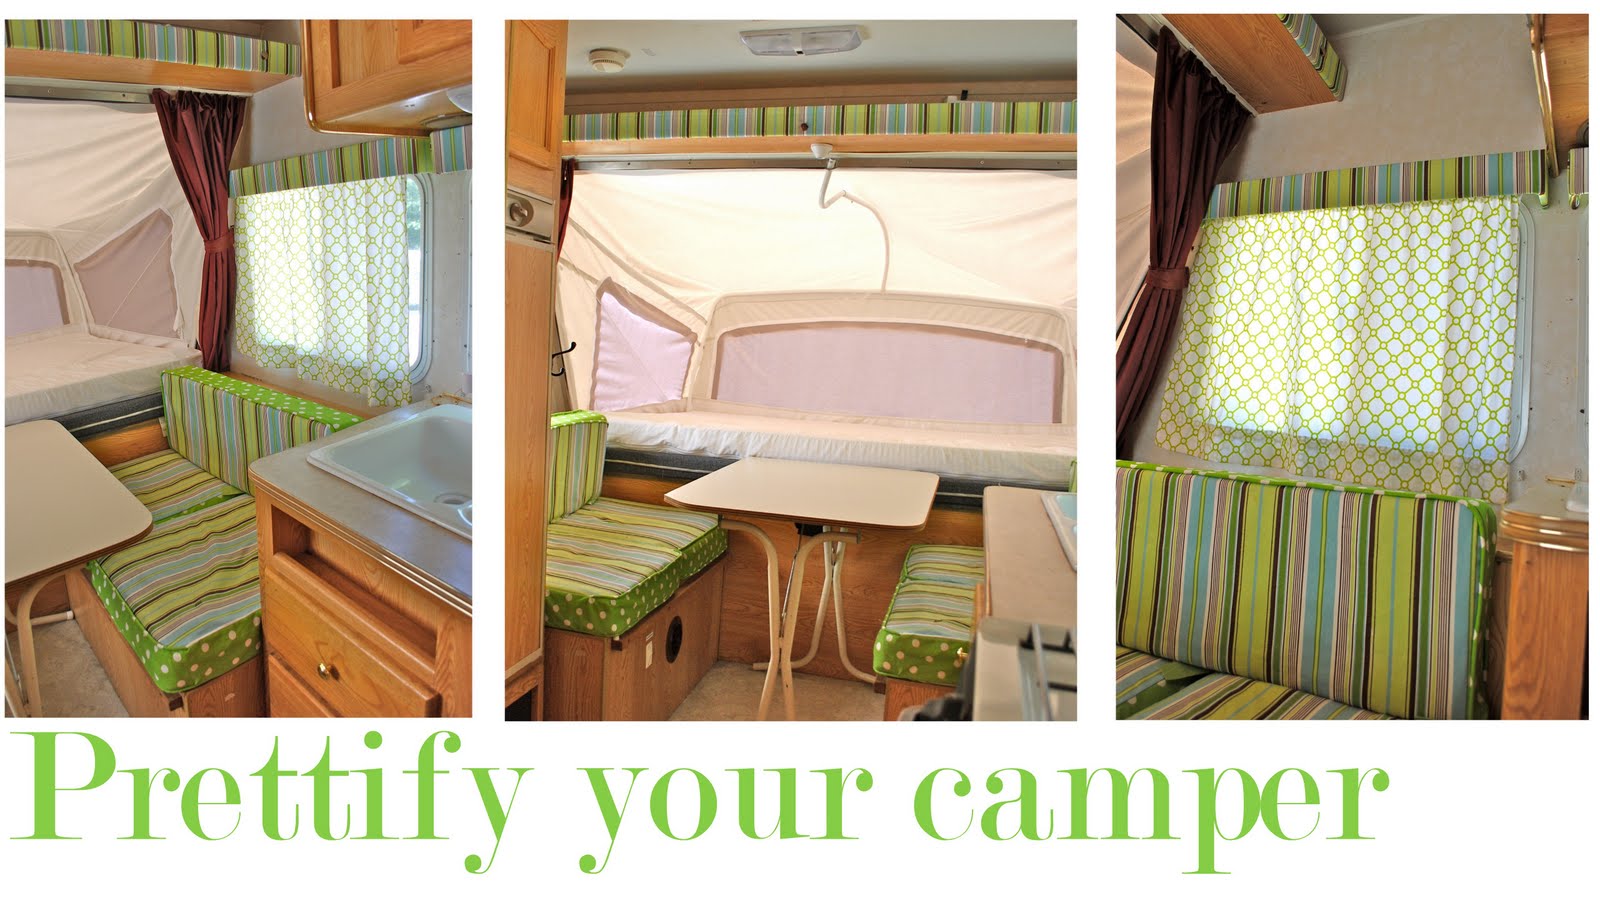 redoing bathroom ideas Pink and Polka Dot: Prettify your camper